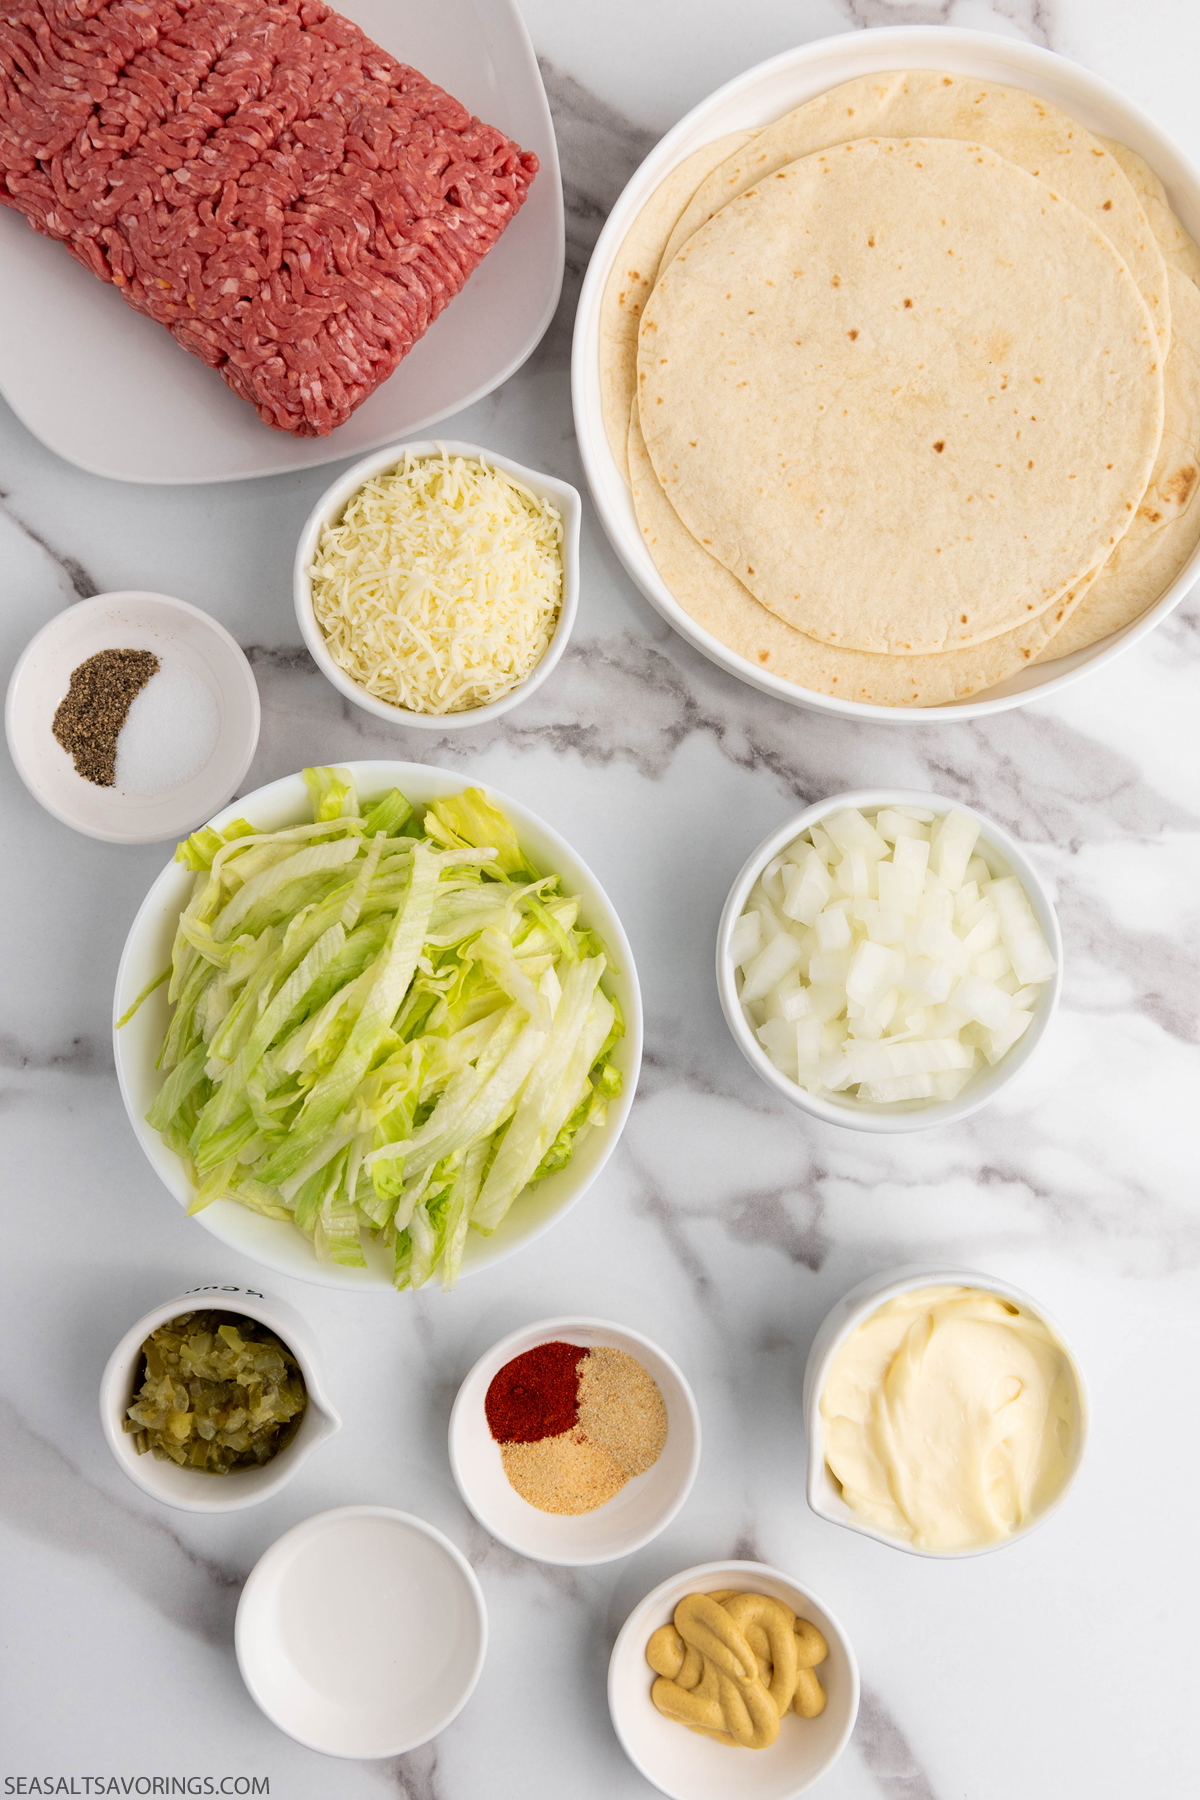 fresh ingredients for tacos such as tortillas, ground beef, and toppings